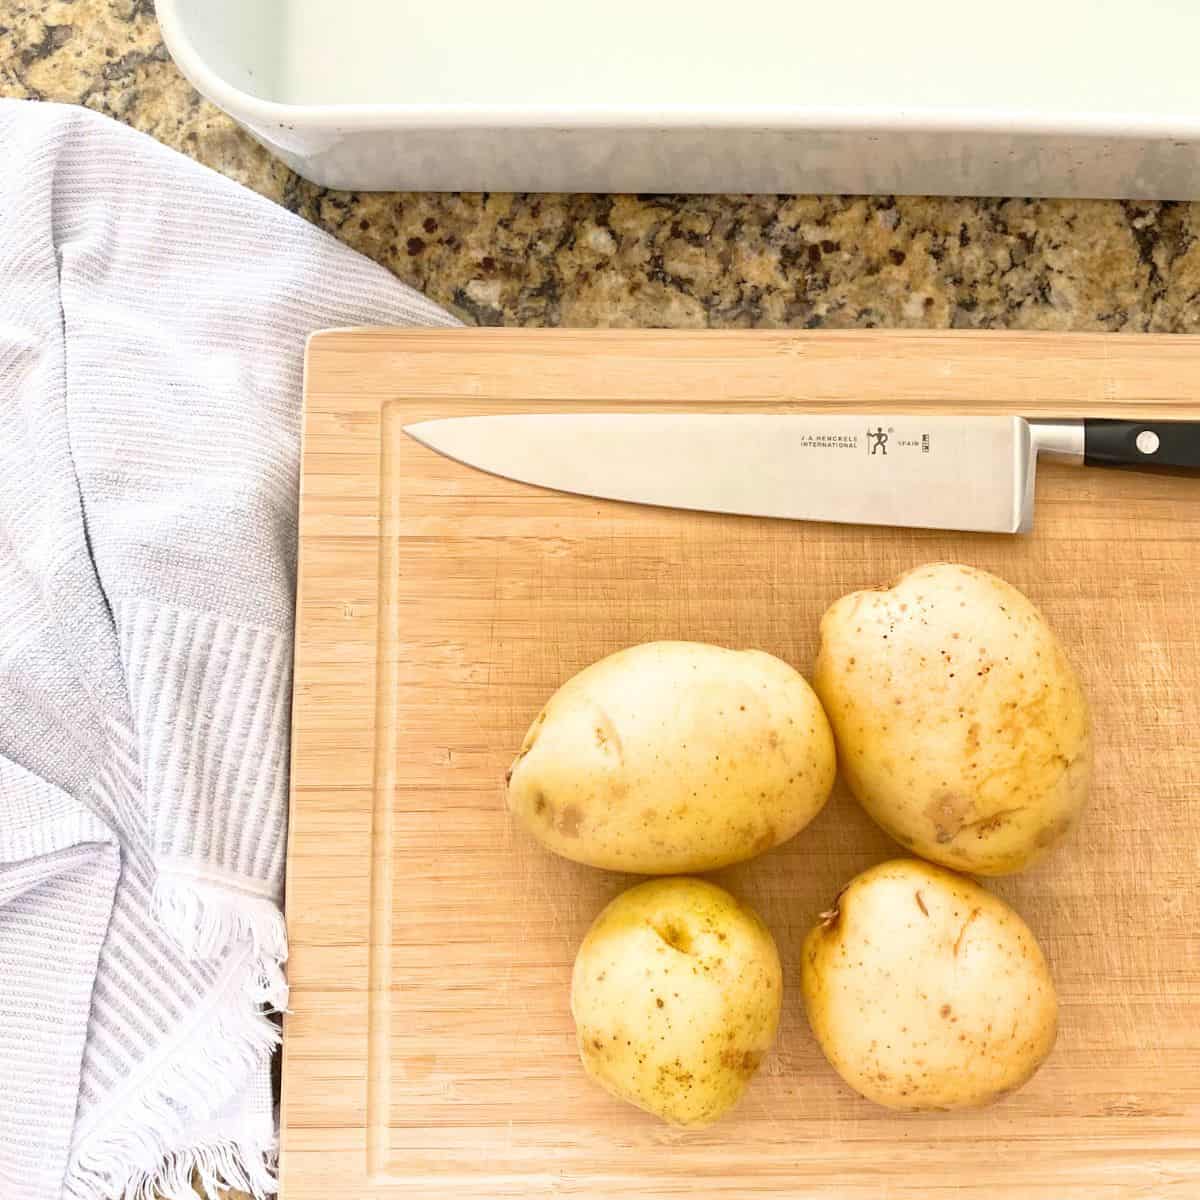 Four whole raw yellow potatoes atop a cutting board